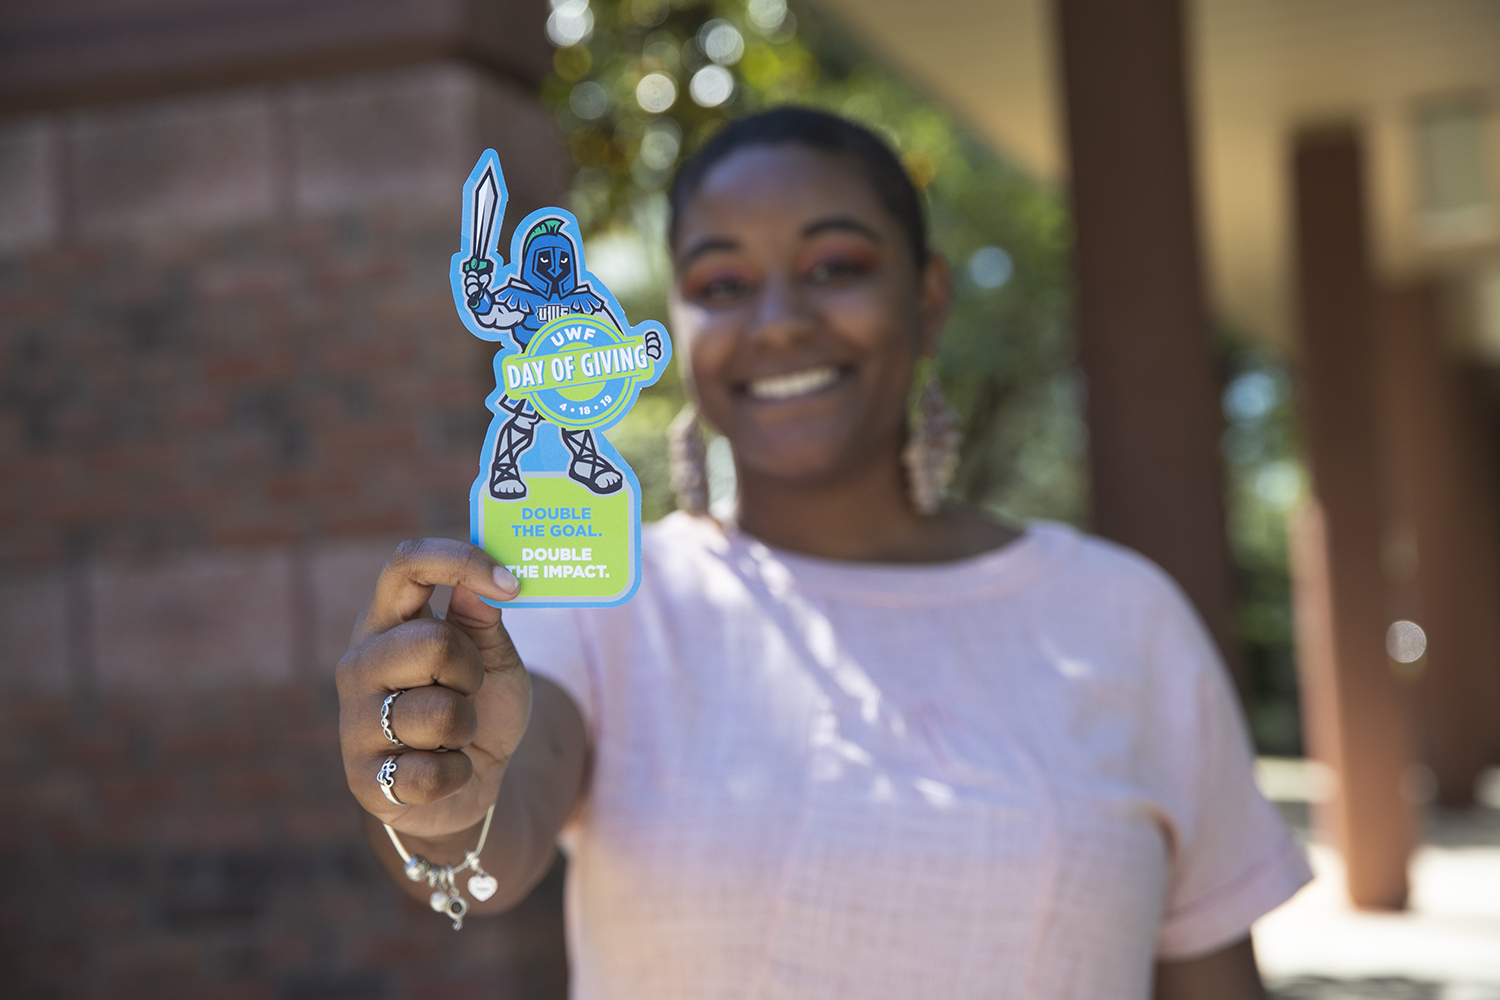 UWF student holds Argie cut-out in honor of Day of Giving during UWF Founders Week